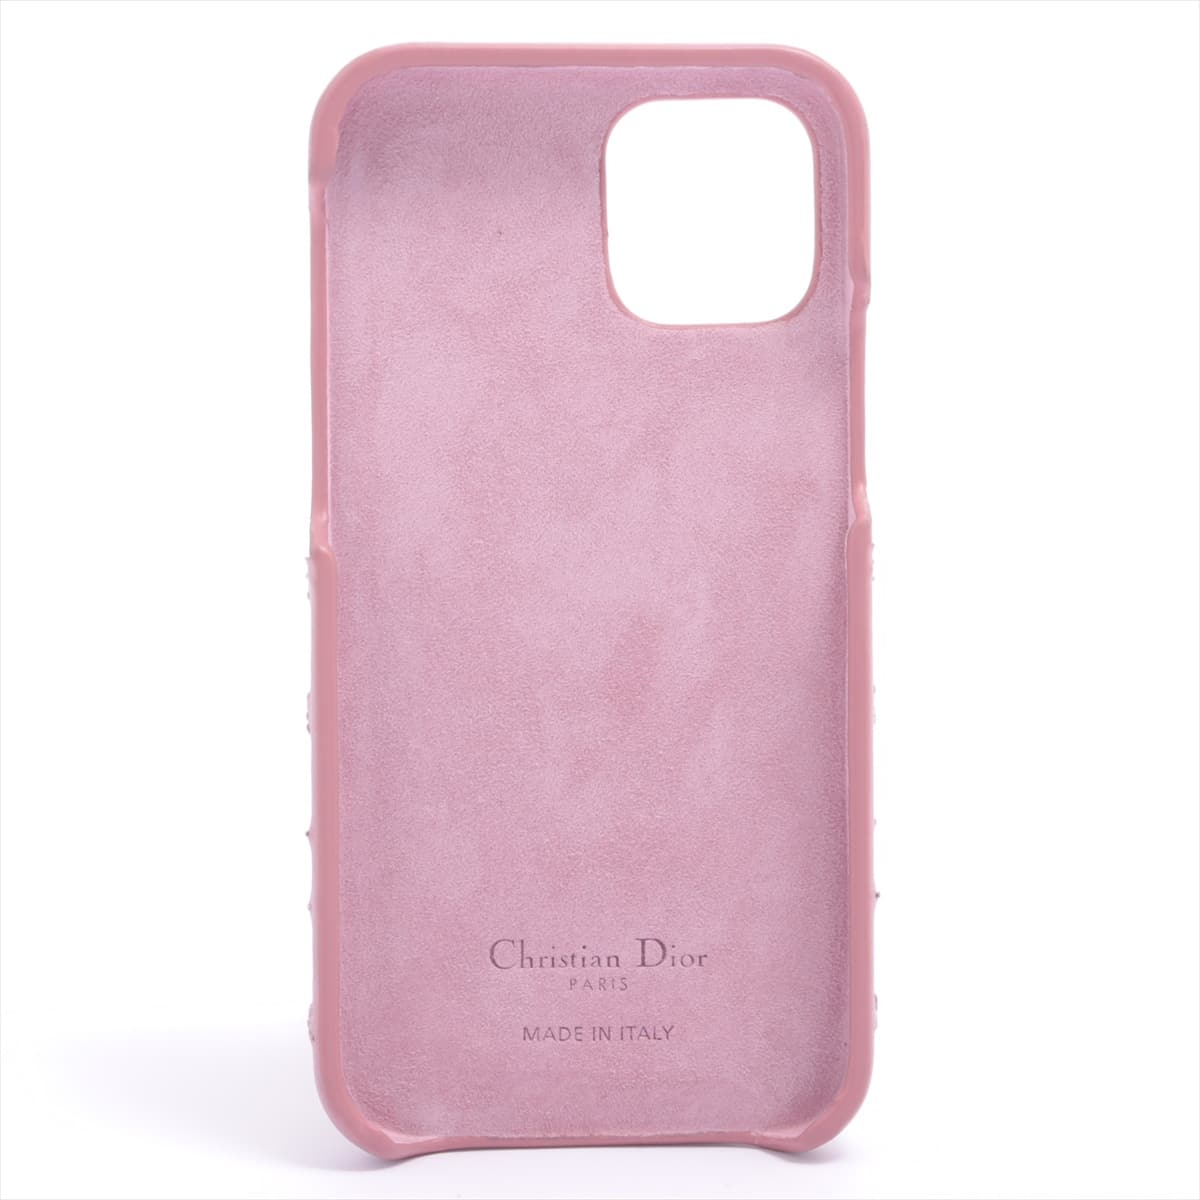 Christian Dior Lady Dior Cannage Leather Mobile phone cover Pink iPhone12Pro